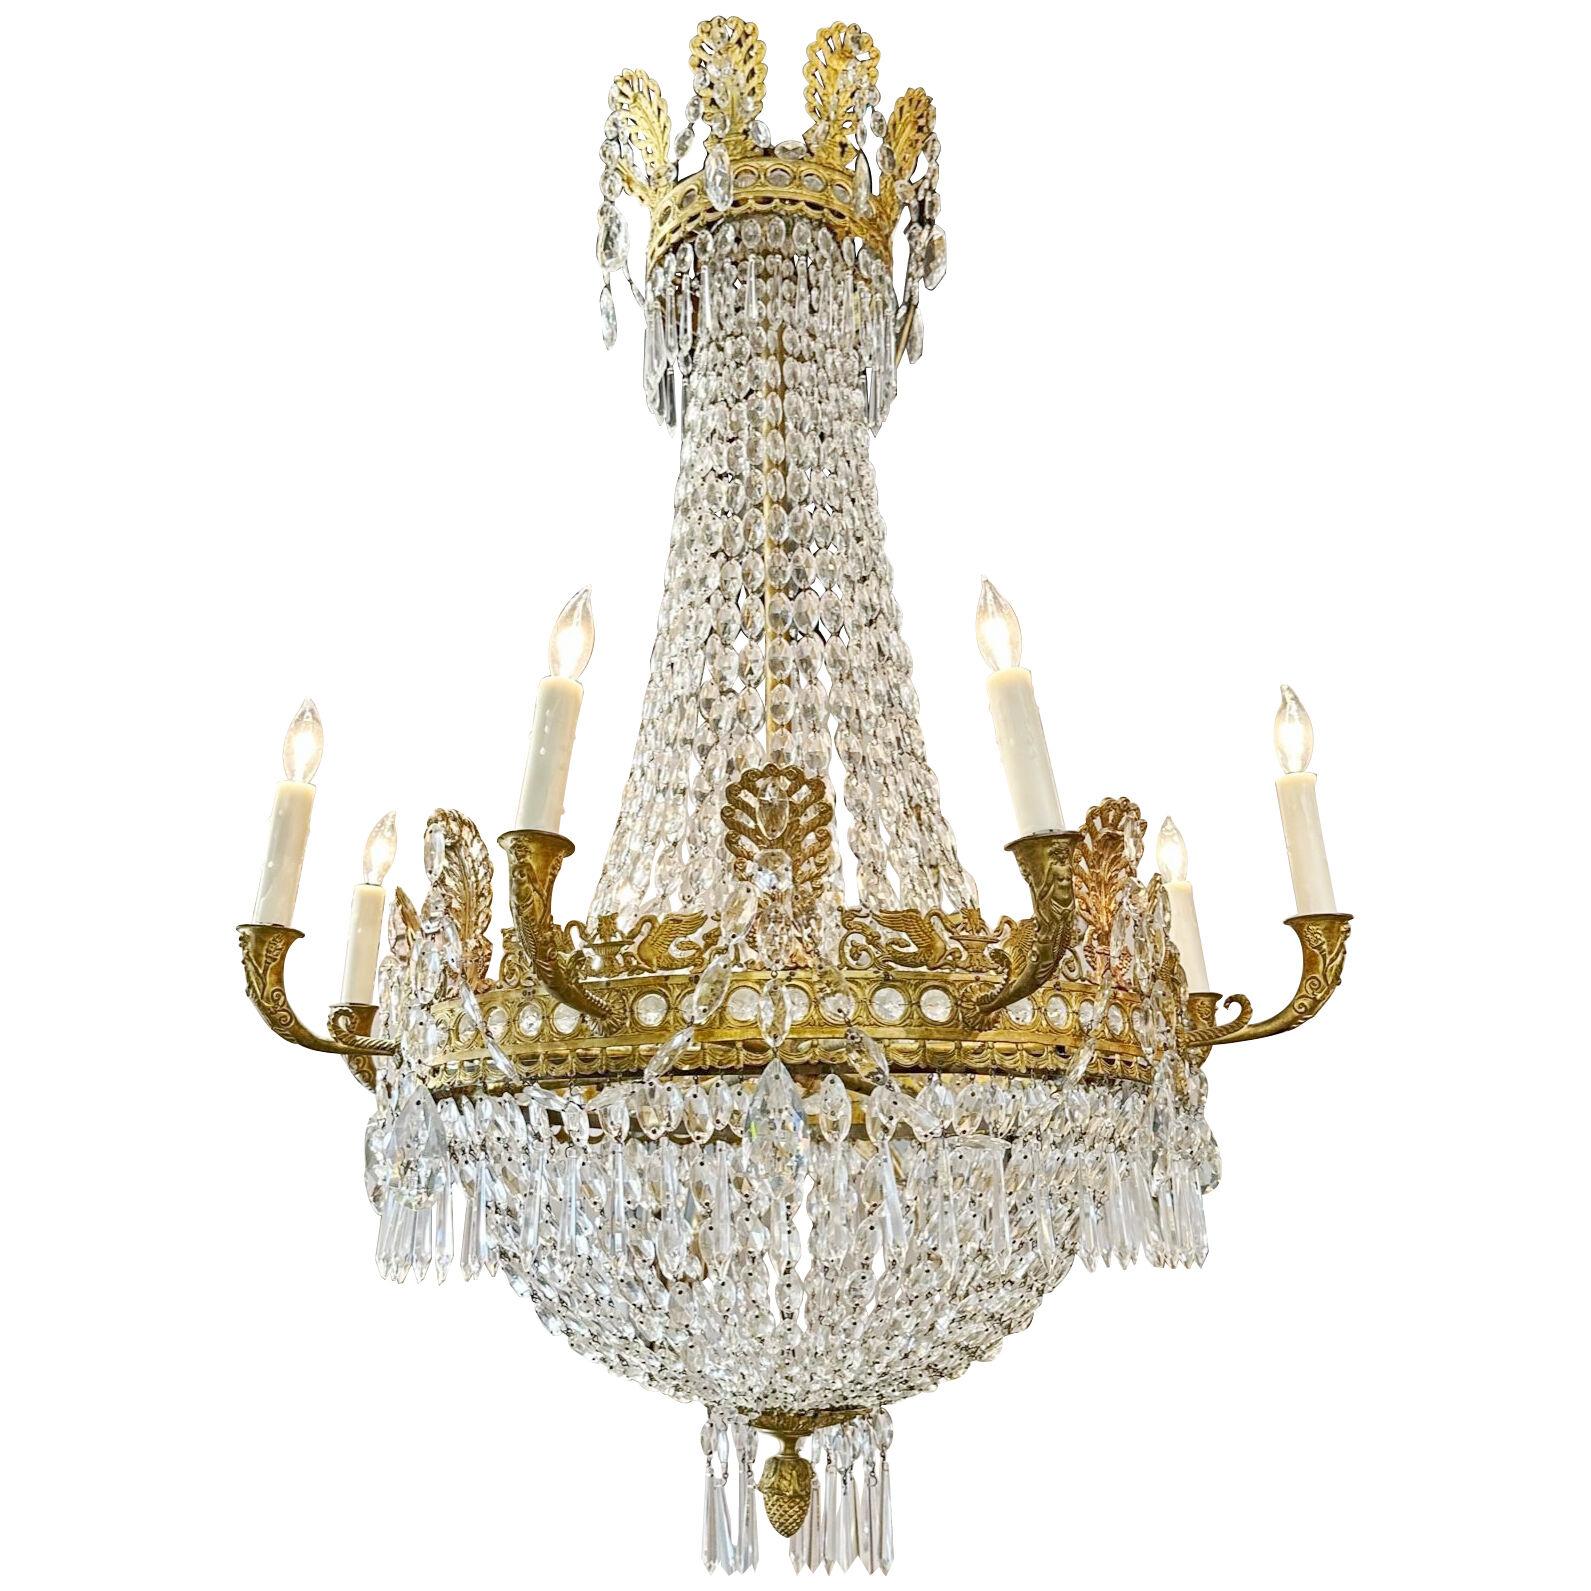 French Empire Basket Form Chandelier